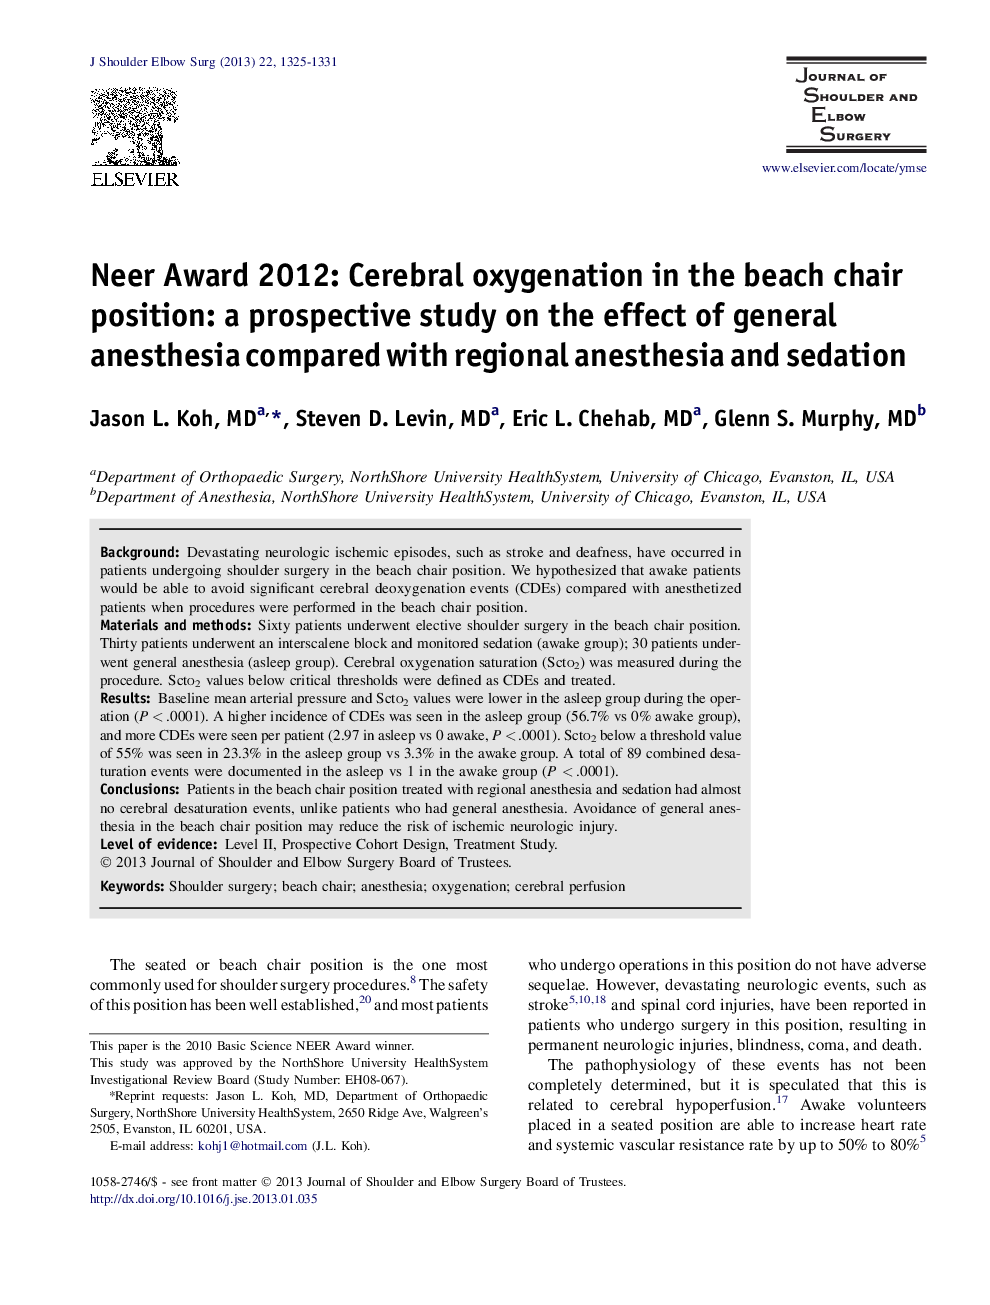 Neer Award 2012: Cerebral oxygenation in the beach chair position: a prospective study on the effect of general anesthesia compared with regional anesthesia and sedation 